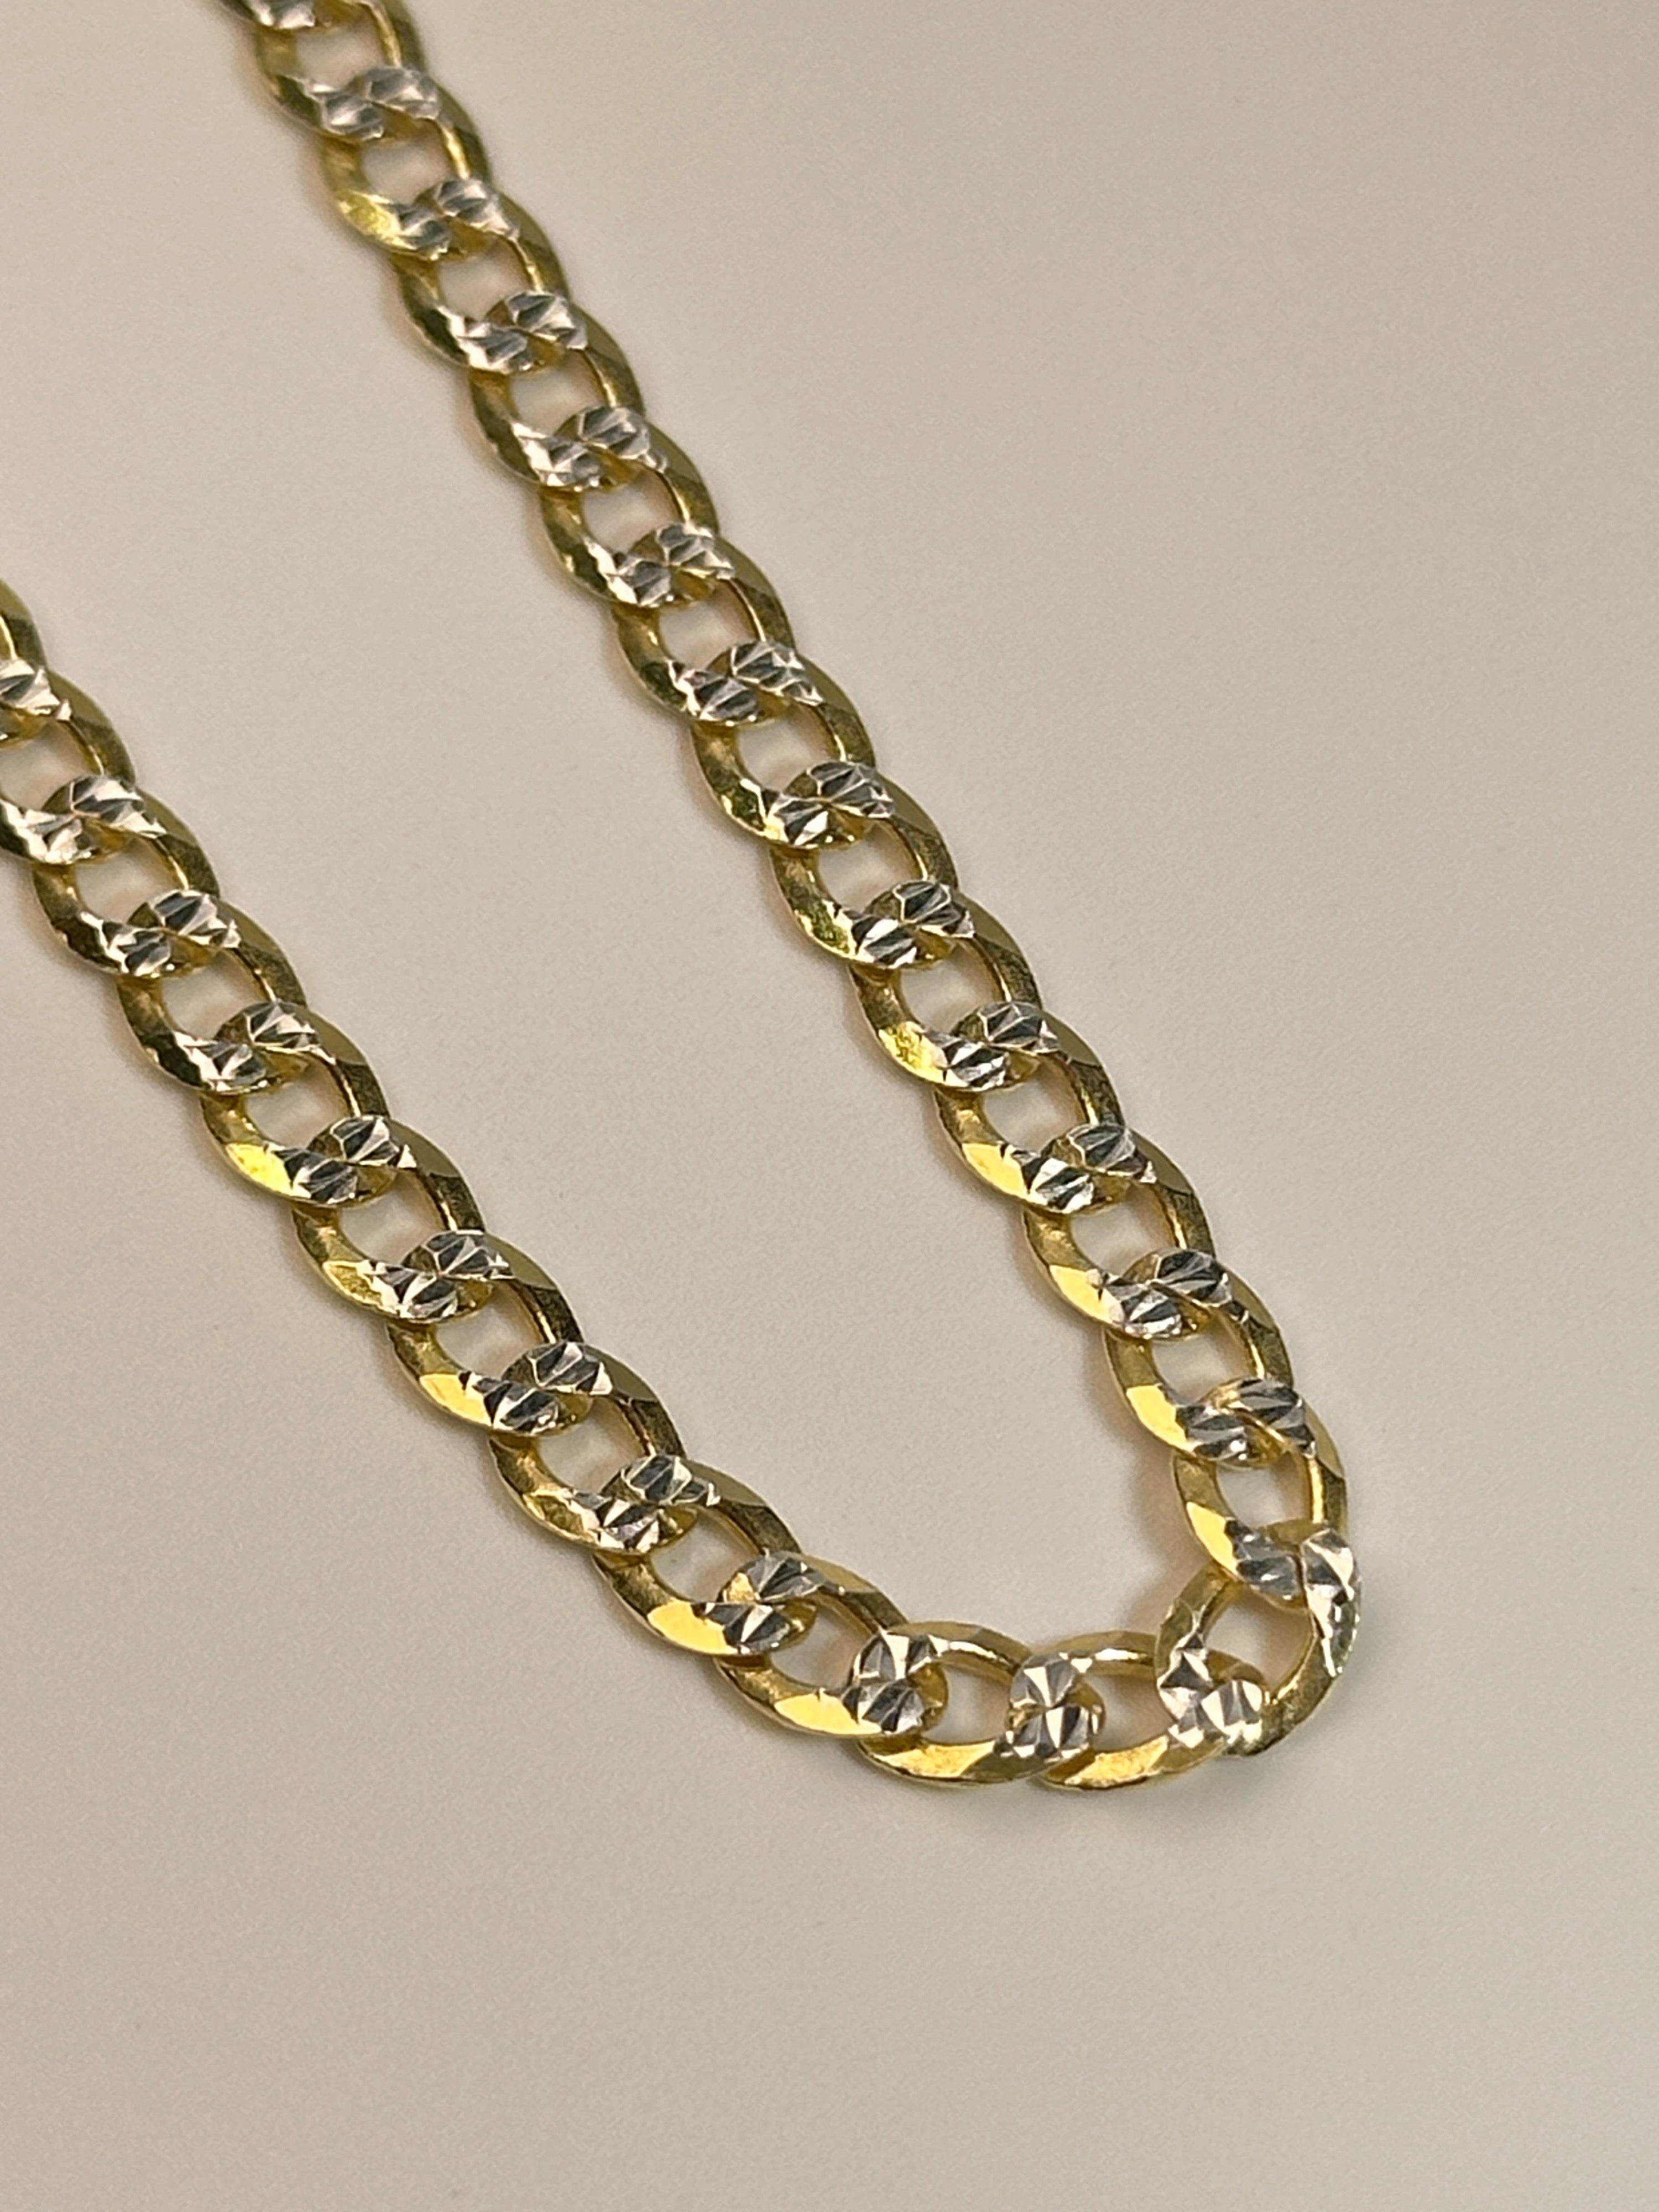 DR1757 - 10K Yellow Gold - Chain Cuban Link